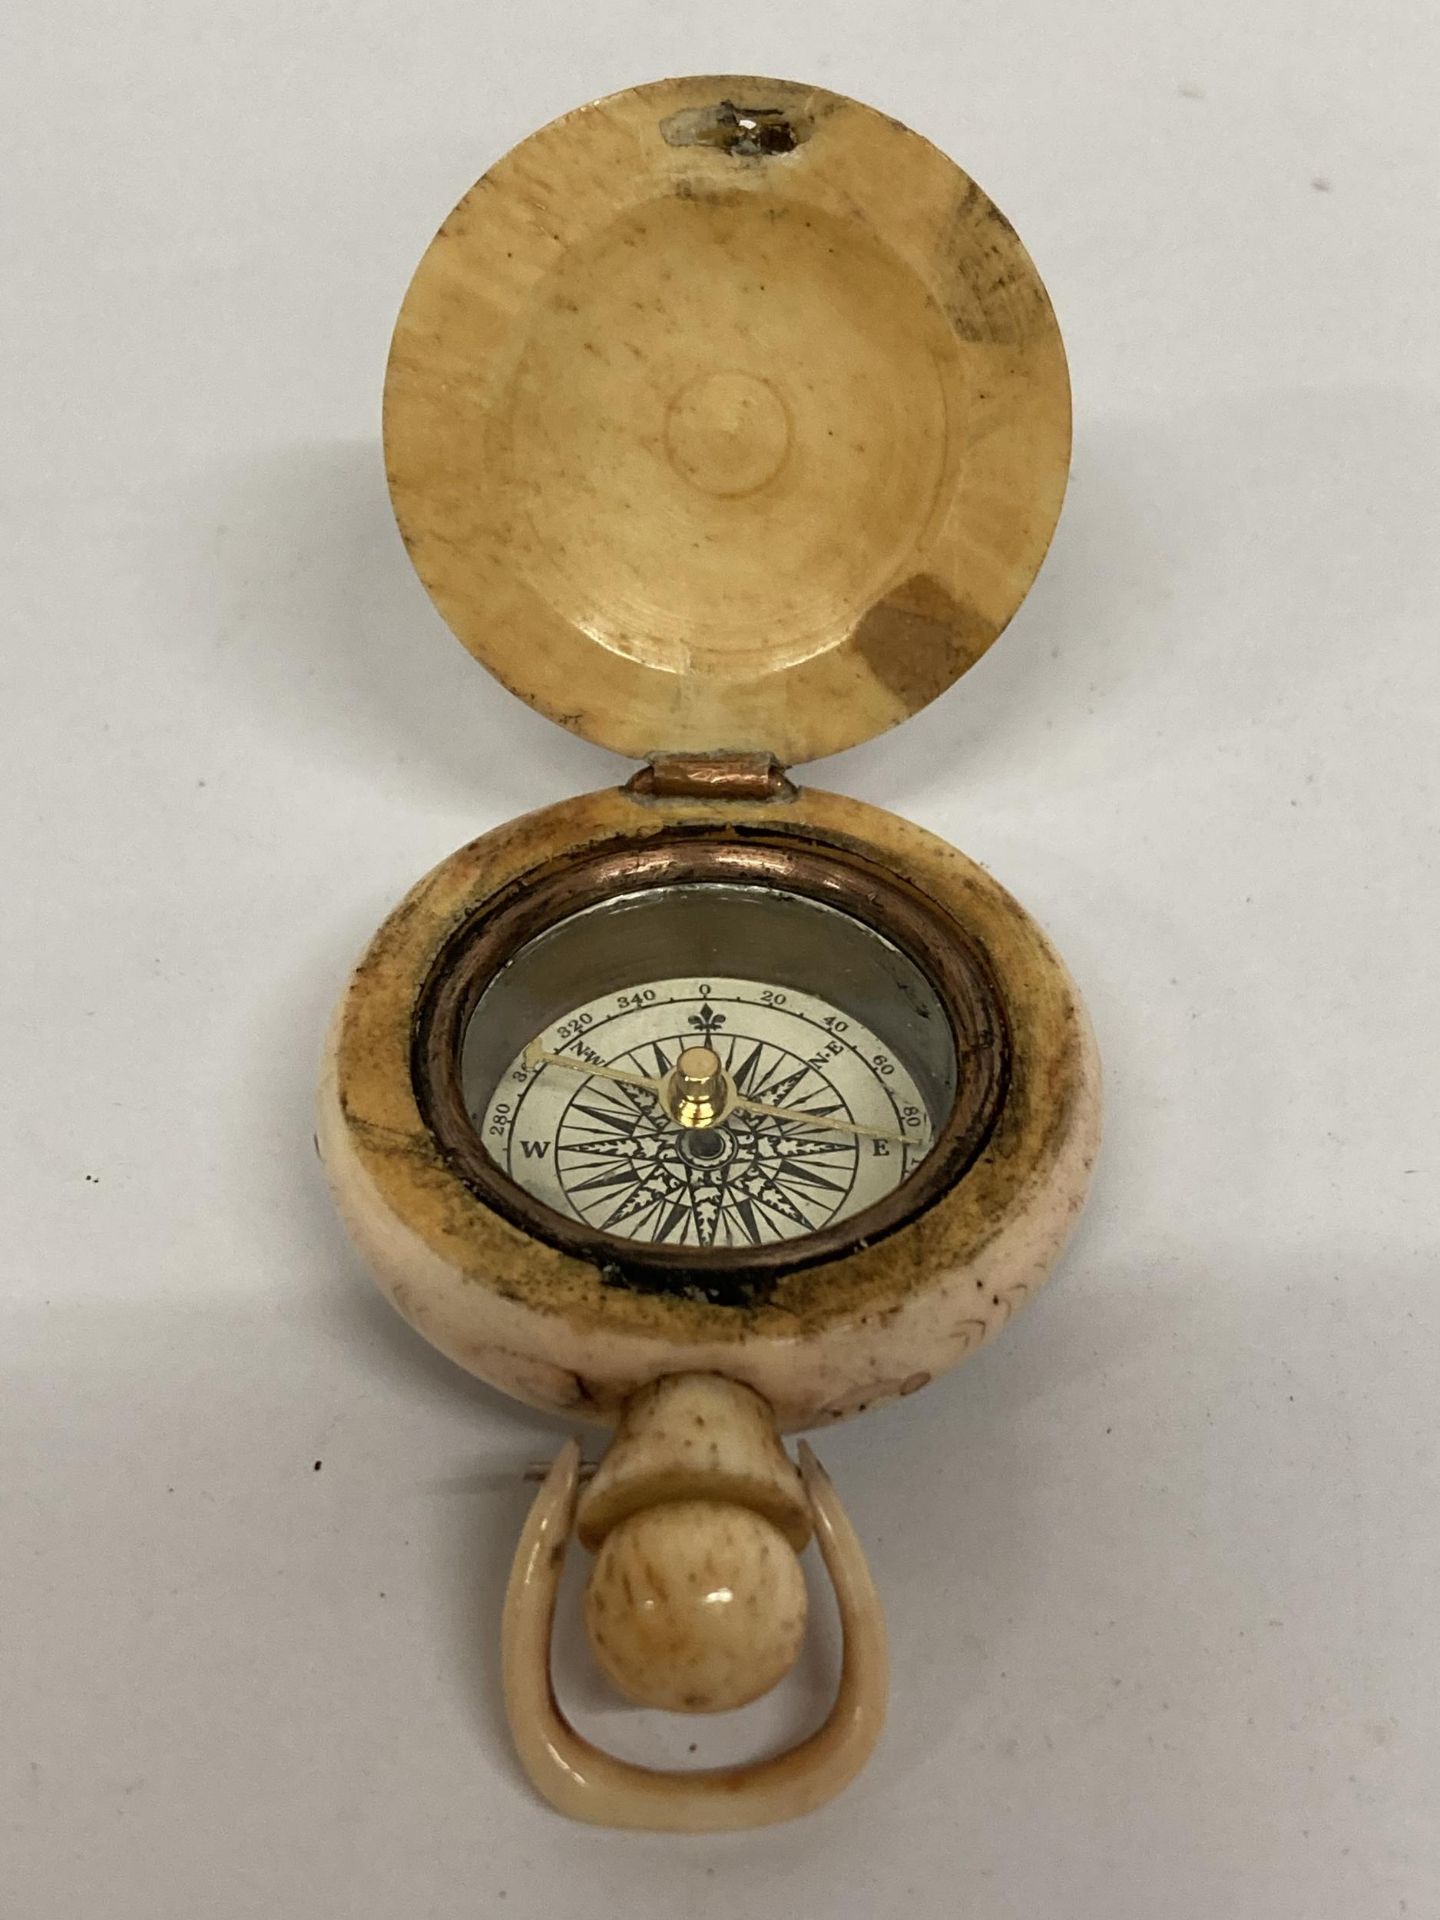 A BONE CARVED SWEET HEARTS COMPASS WITH BIRD AND FIGURES DESIGN